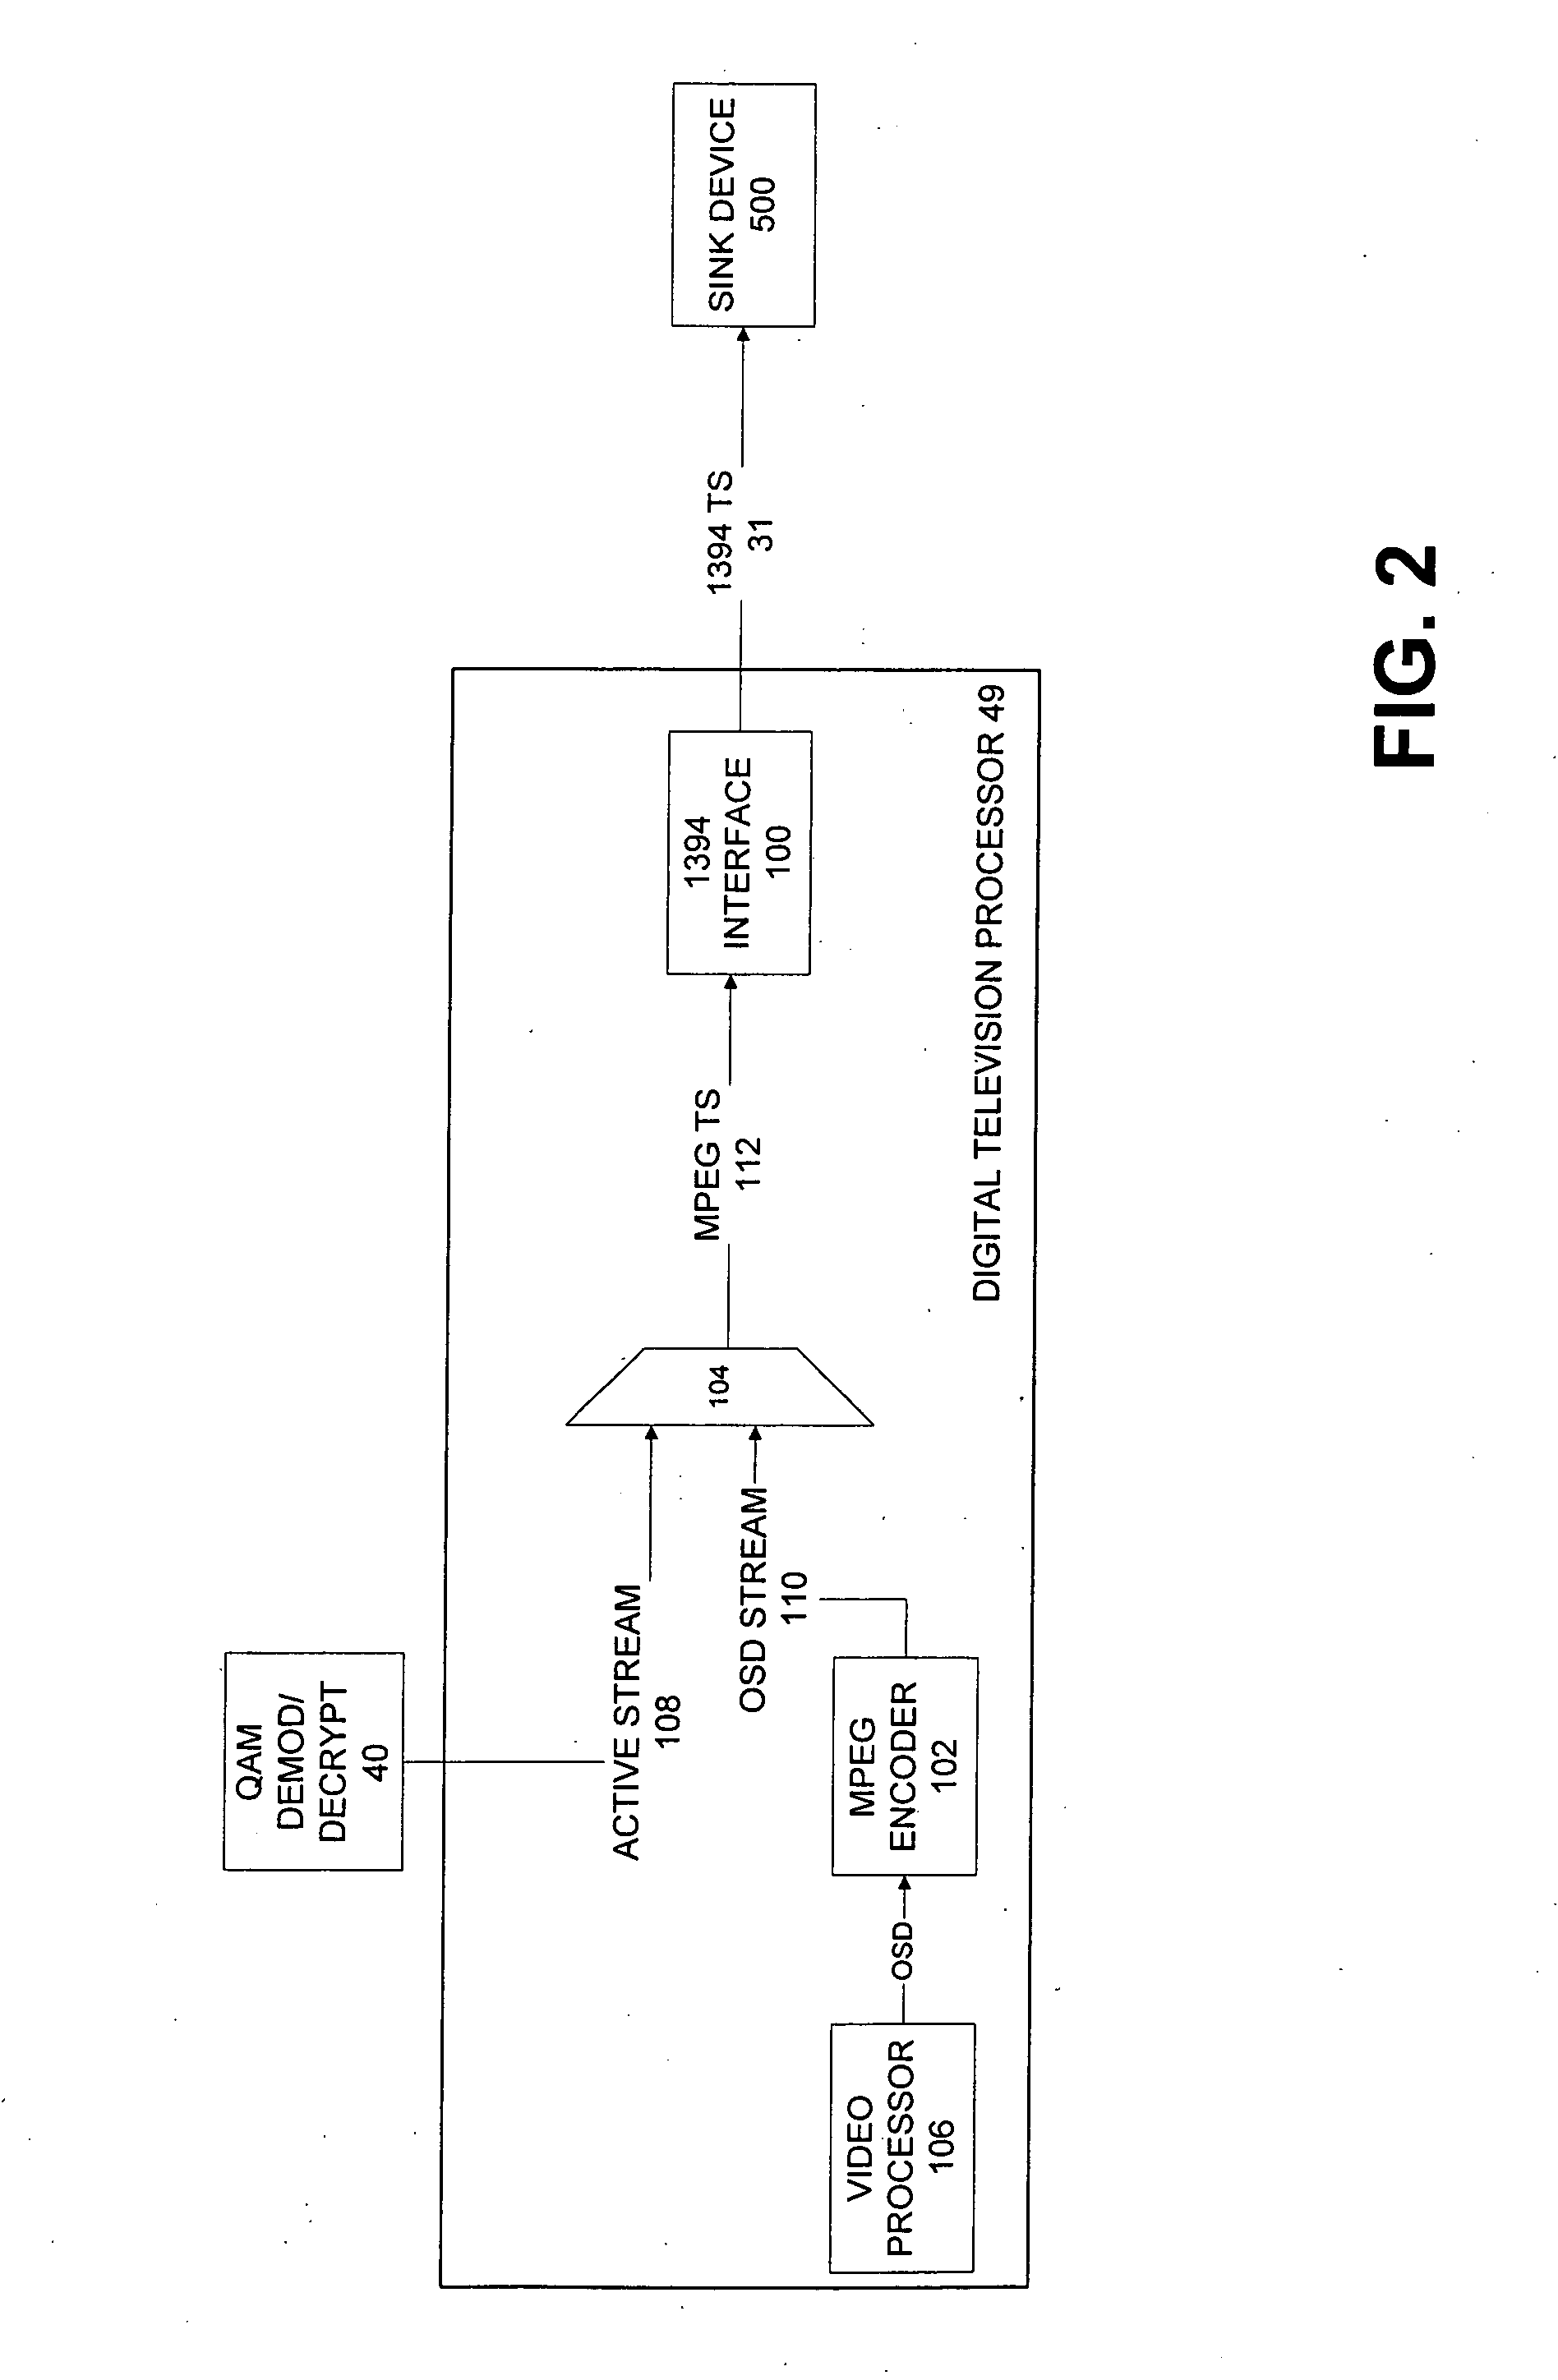 Methods and apparatus for passing an on-screen display over a serial interface